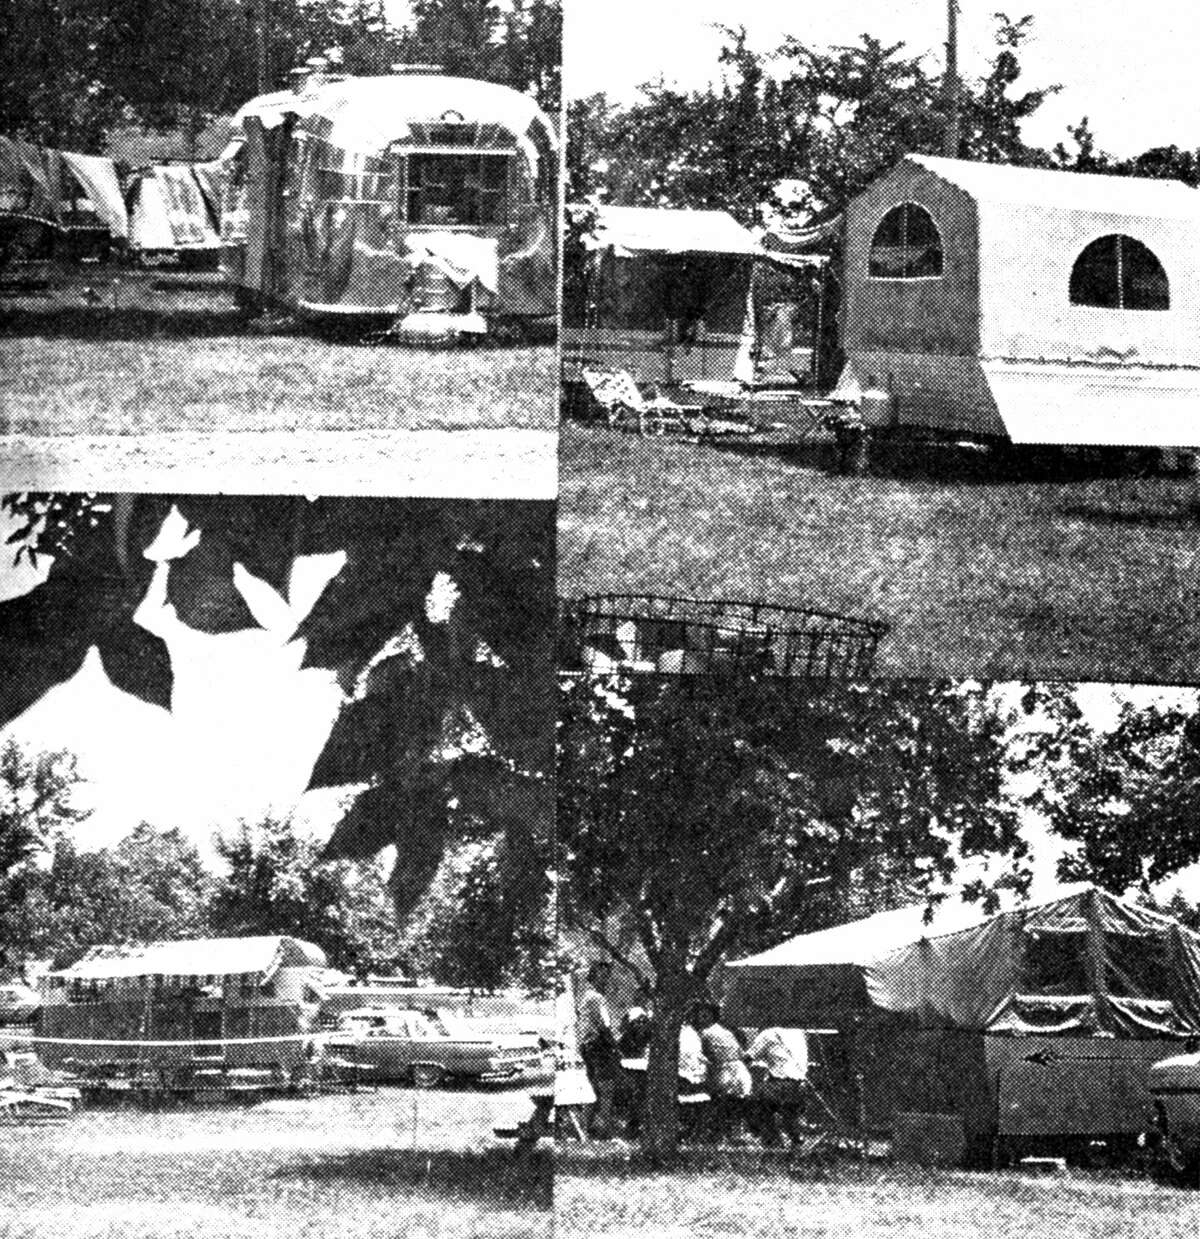 Outdoor camping seems to be gaining popularity year after year and the Orchard Beach State Park scene the last few weeks has been a repeat of this photo many times with all sizes and shapes of camping gear in evidence. The photo was published in the News Advocate on July 11, 1962.